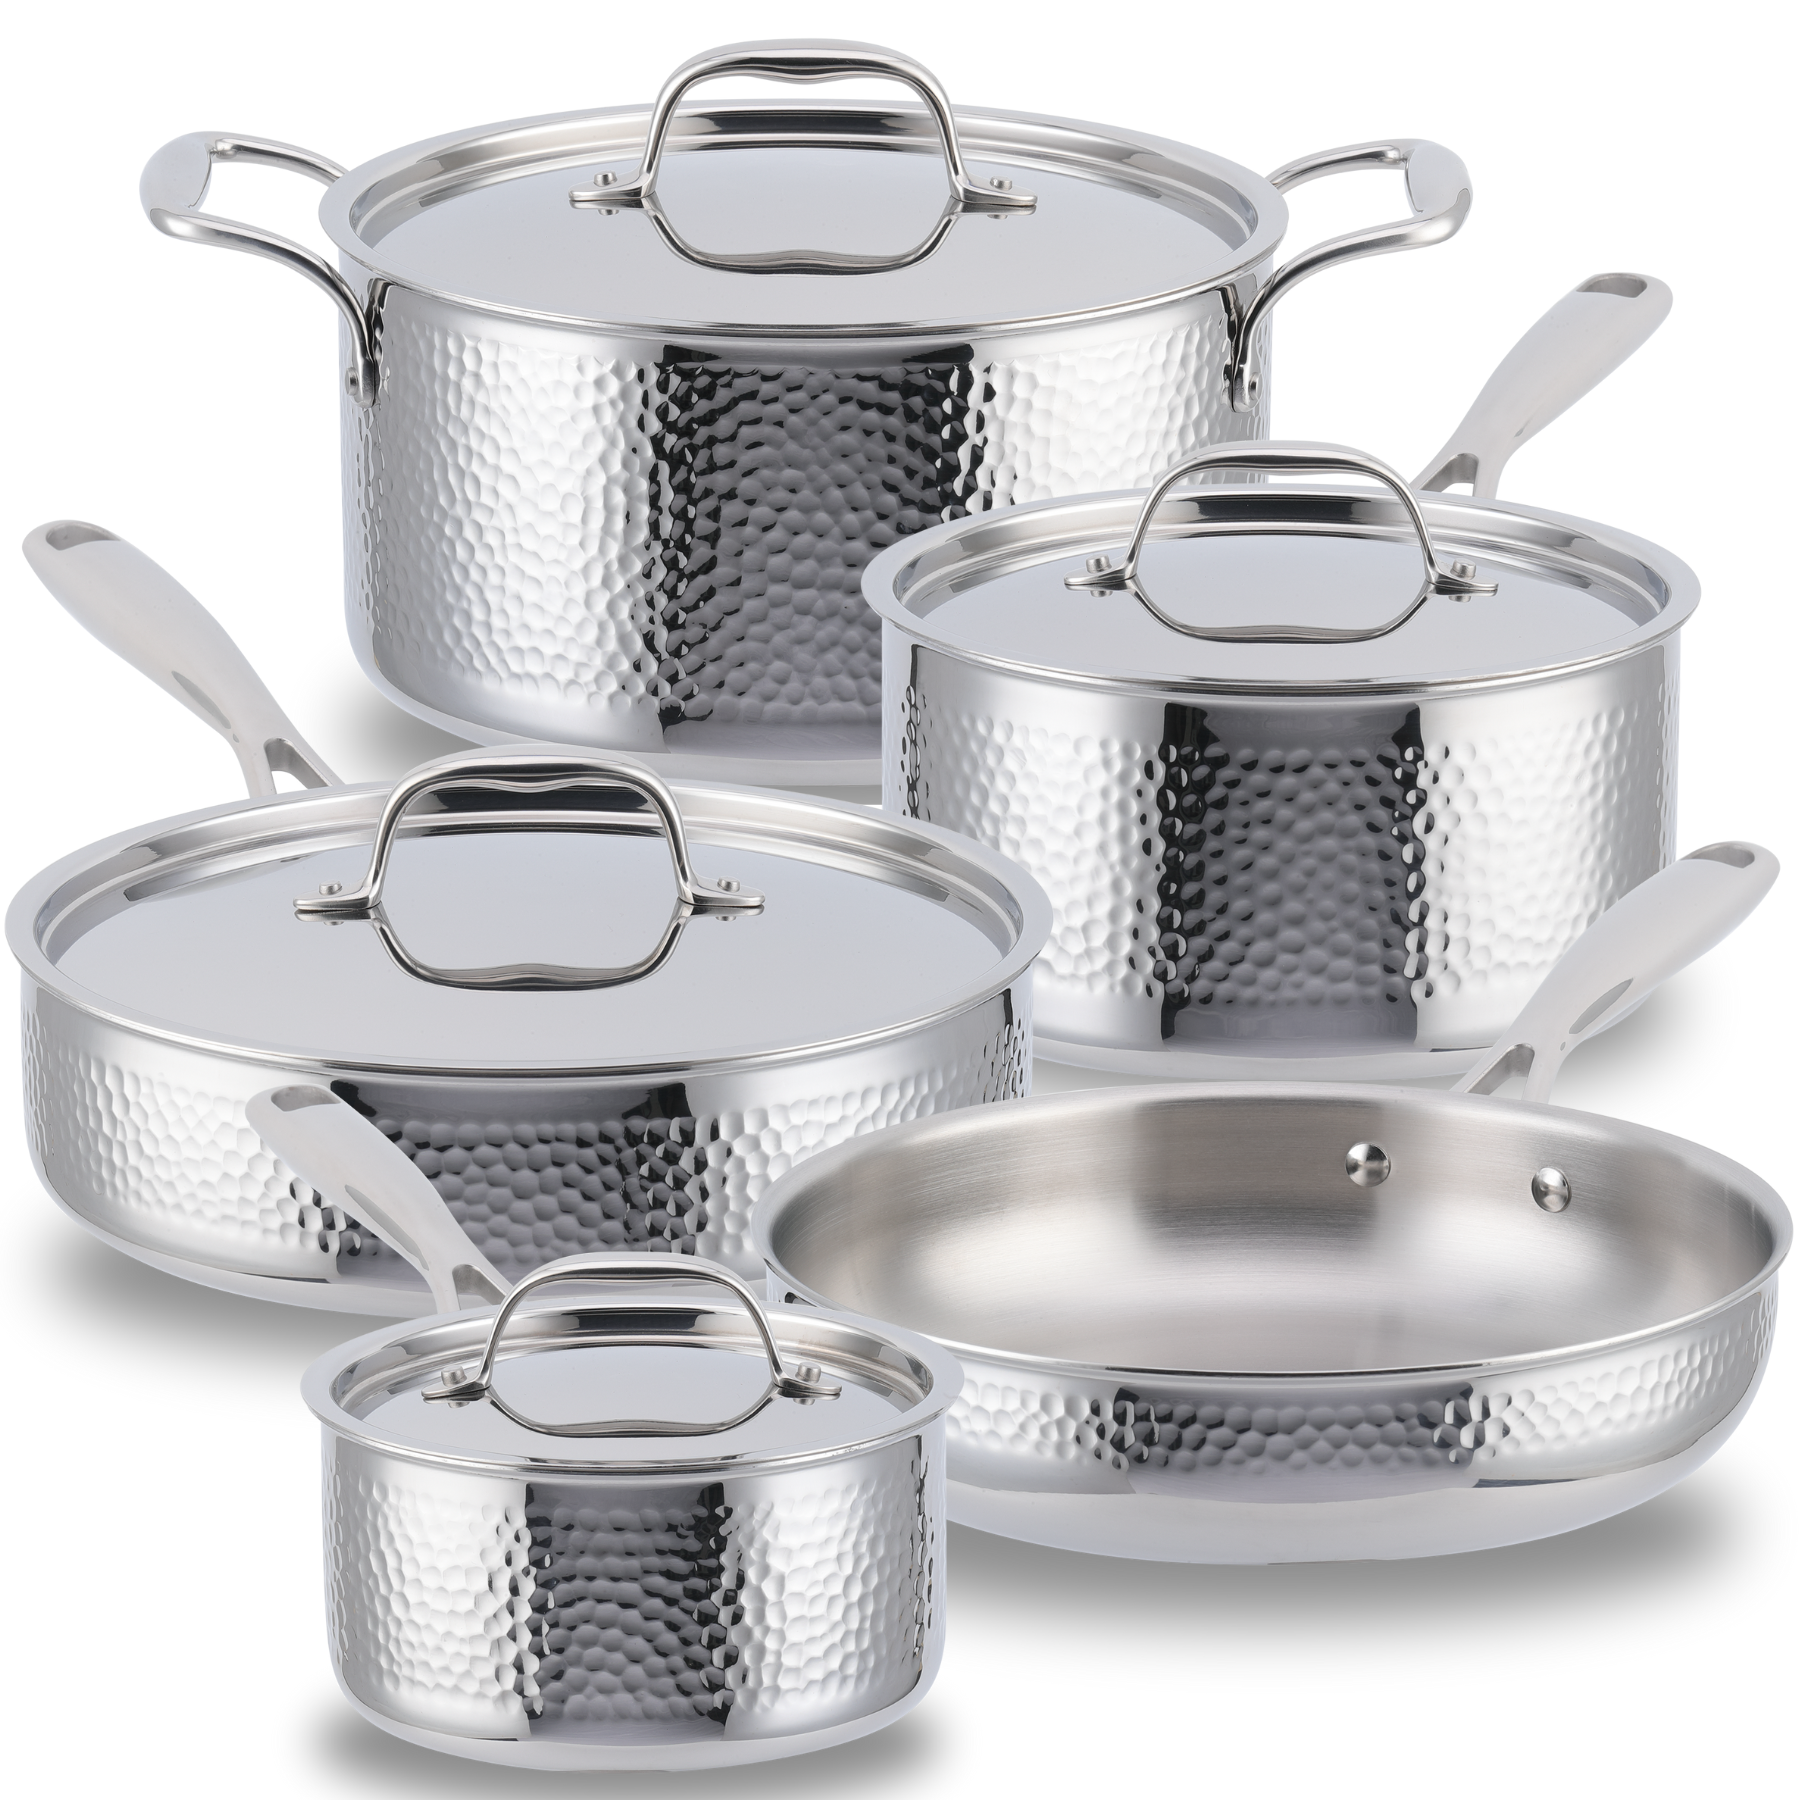 Silver Stainless Steel Mini Saute Pan - 9 x 5 1/4 x 1 1/2 - 1 count box